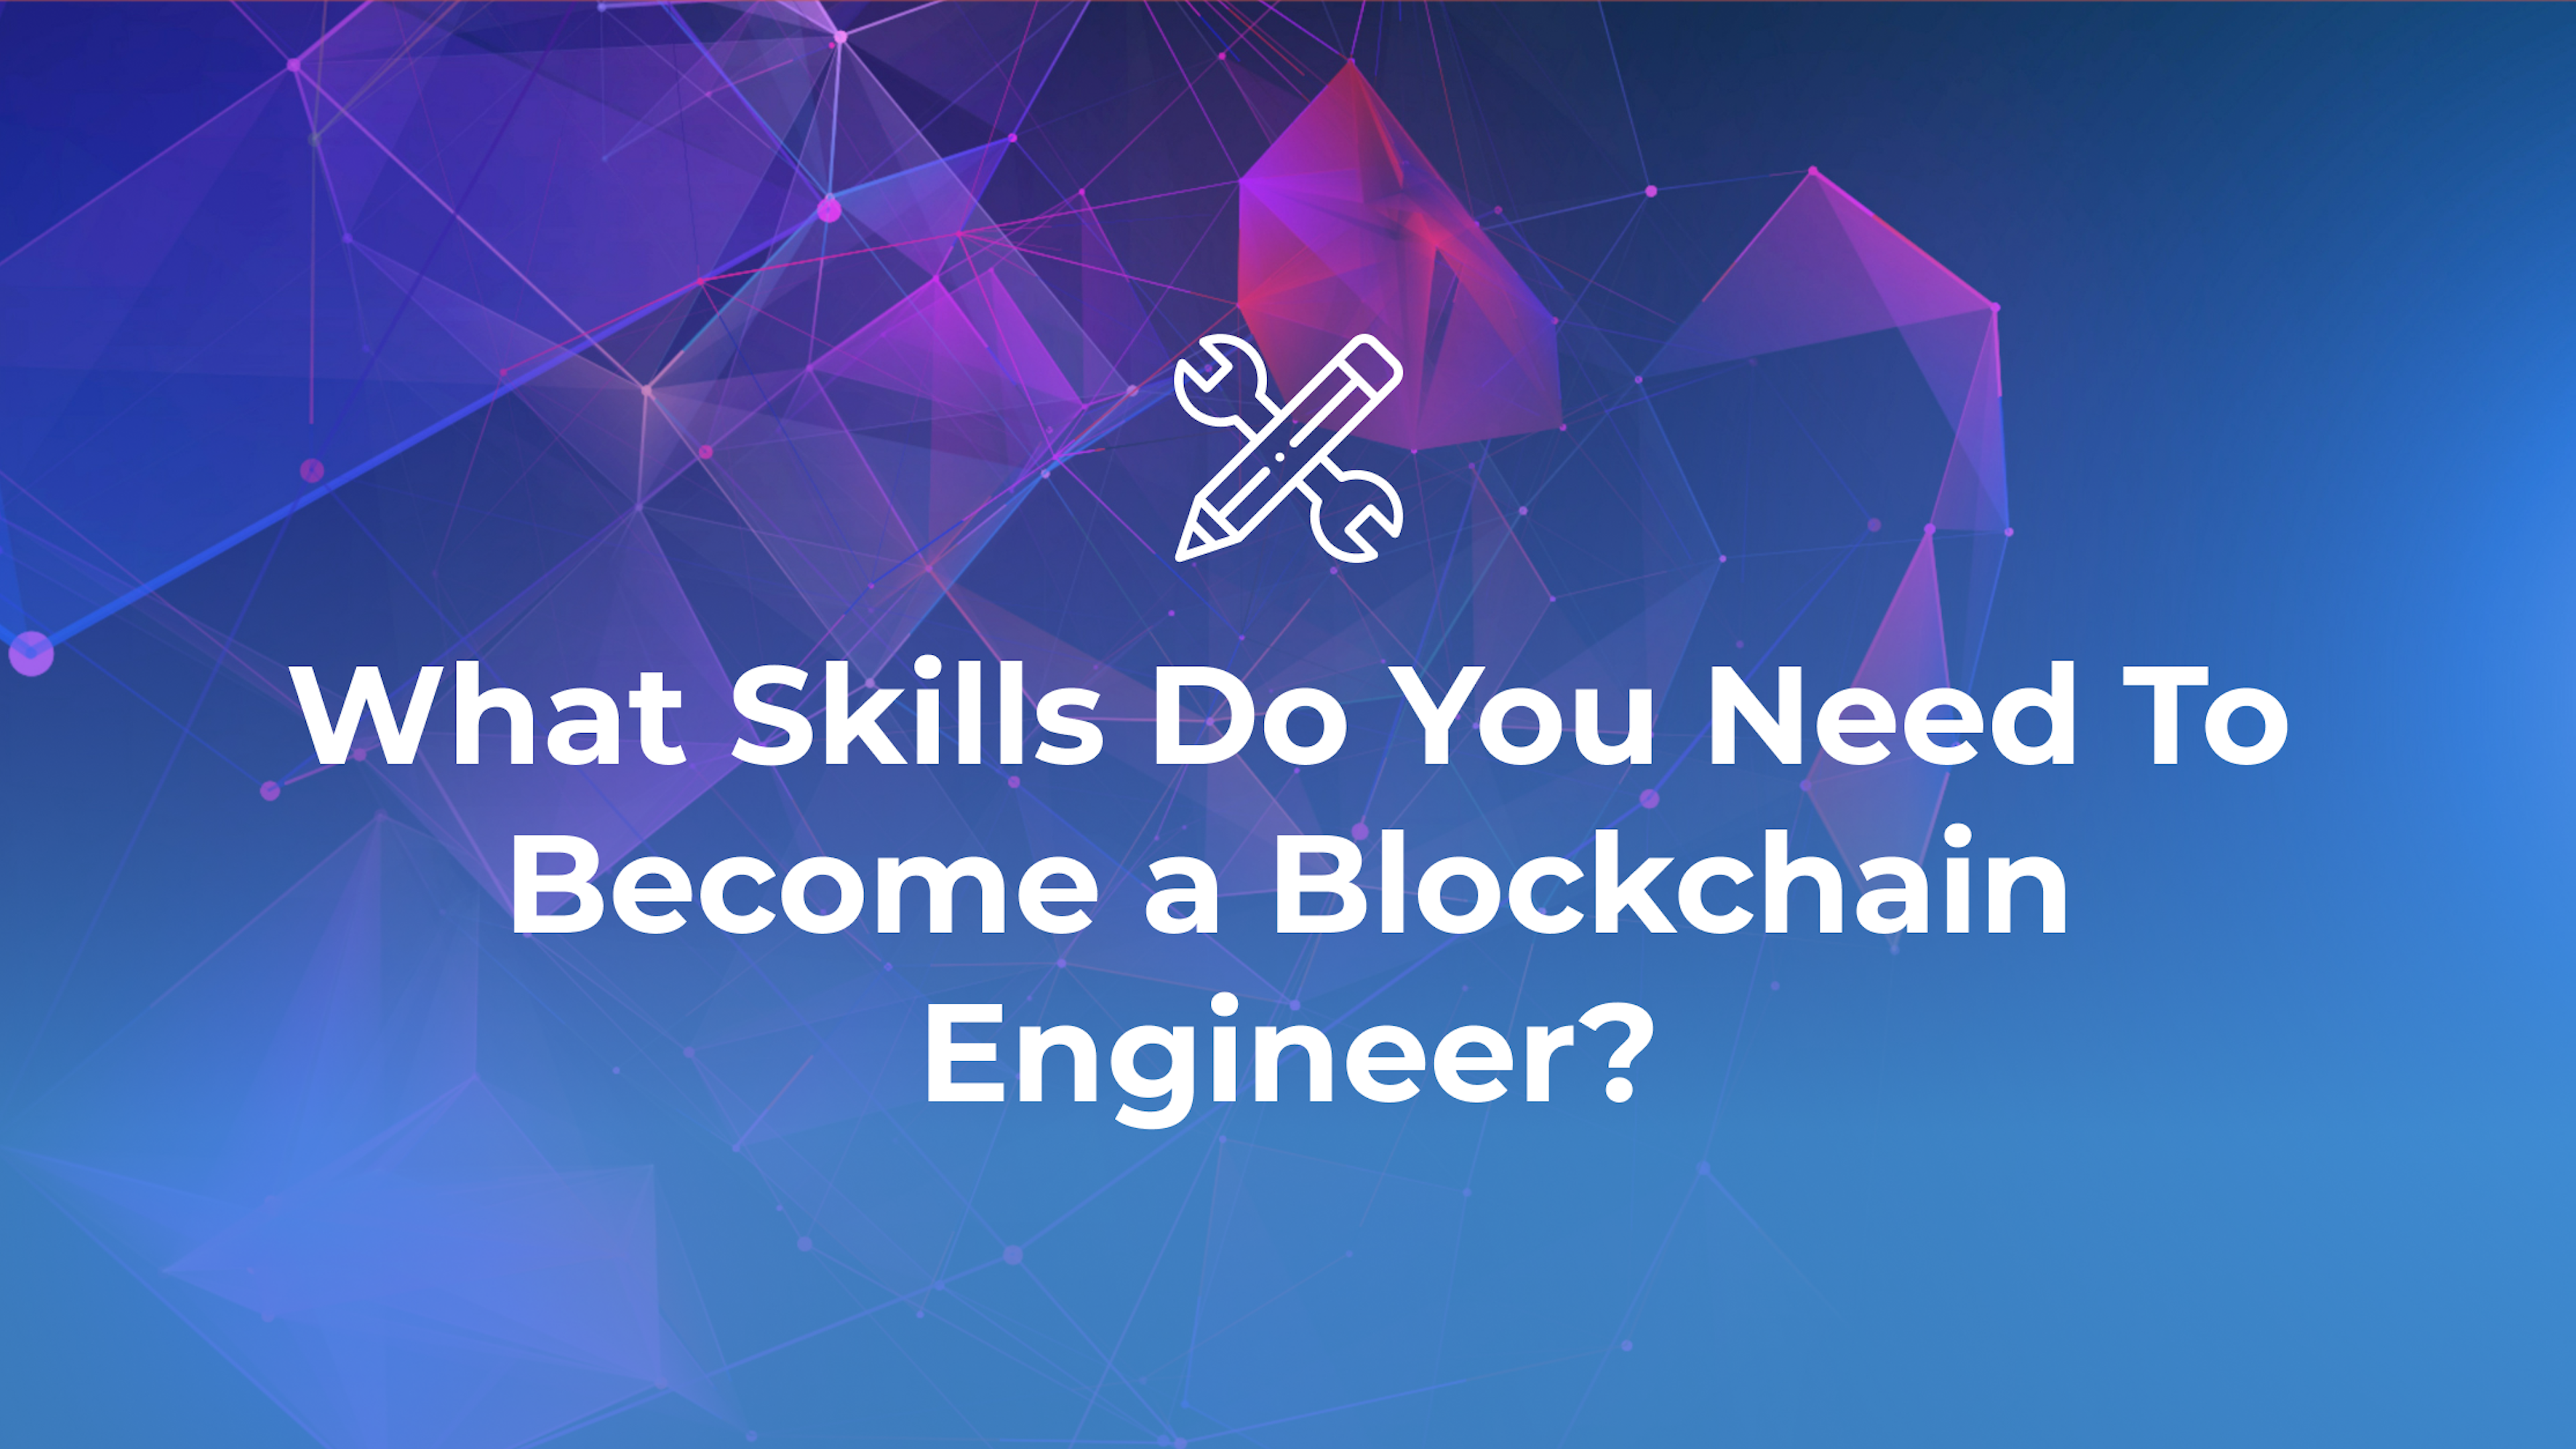 What Skills Do You Need To Become a Blockchain Engineer?